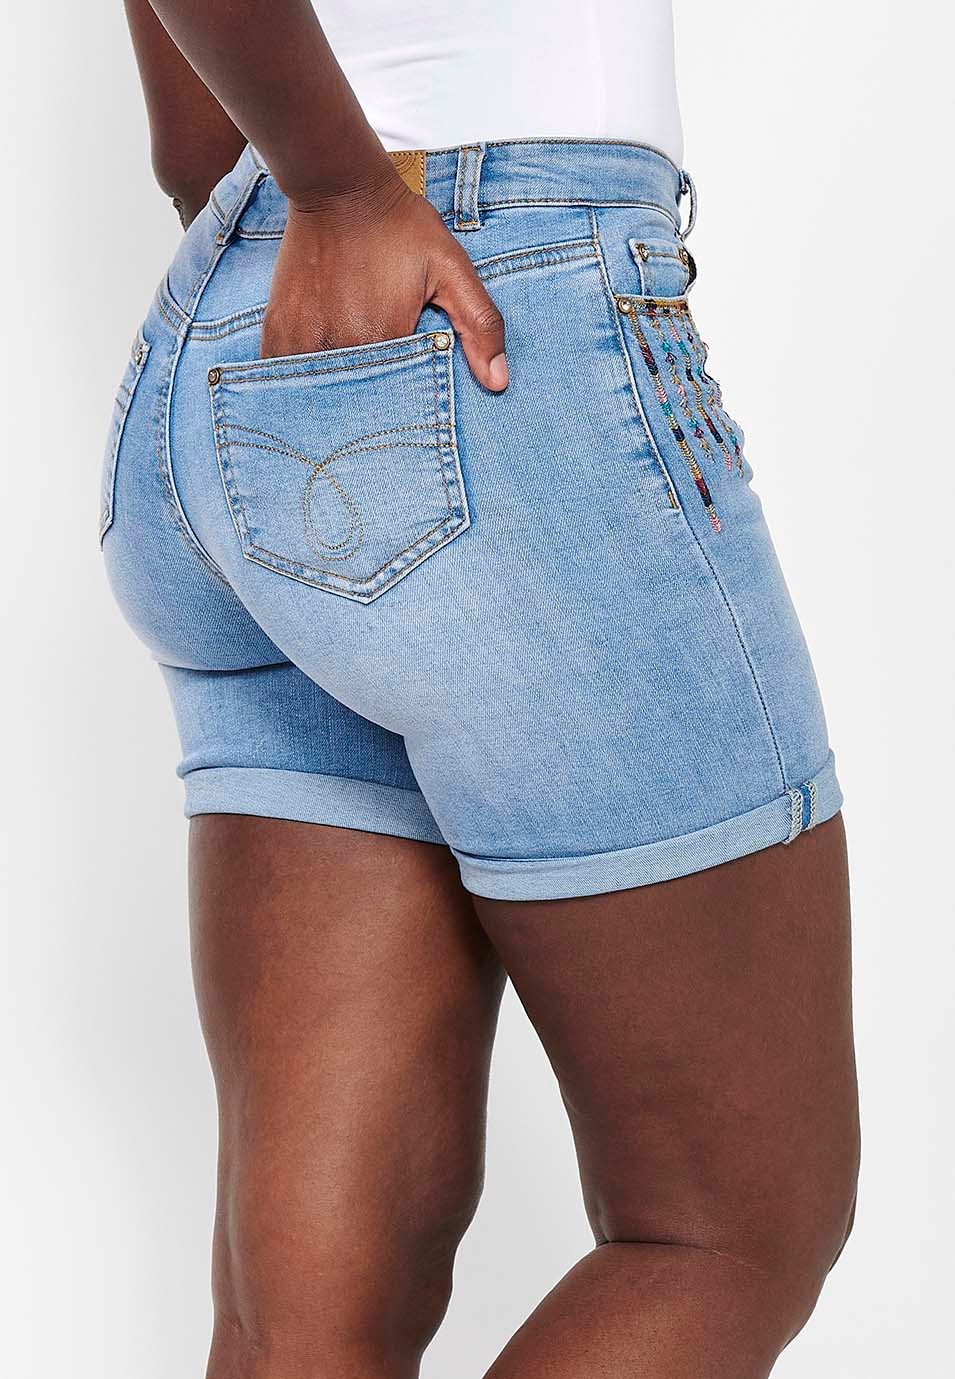 Shorts with cuffed finish with front zipper and button closure with embroidered details in Blue for Women 2